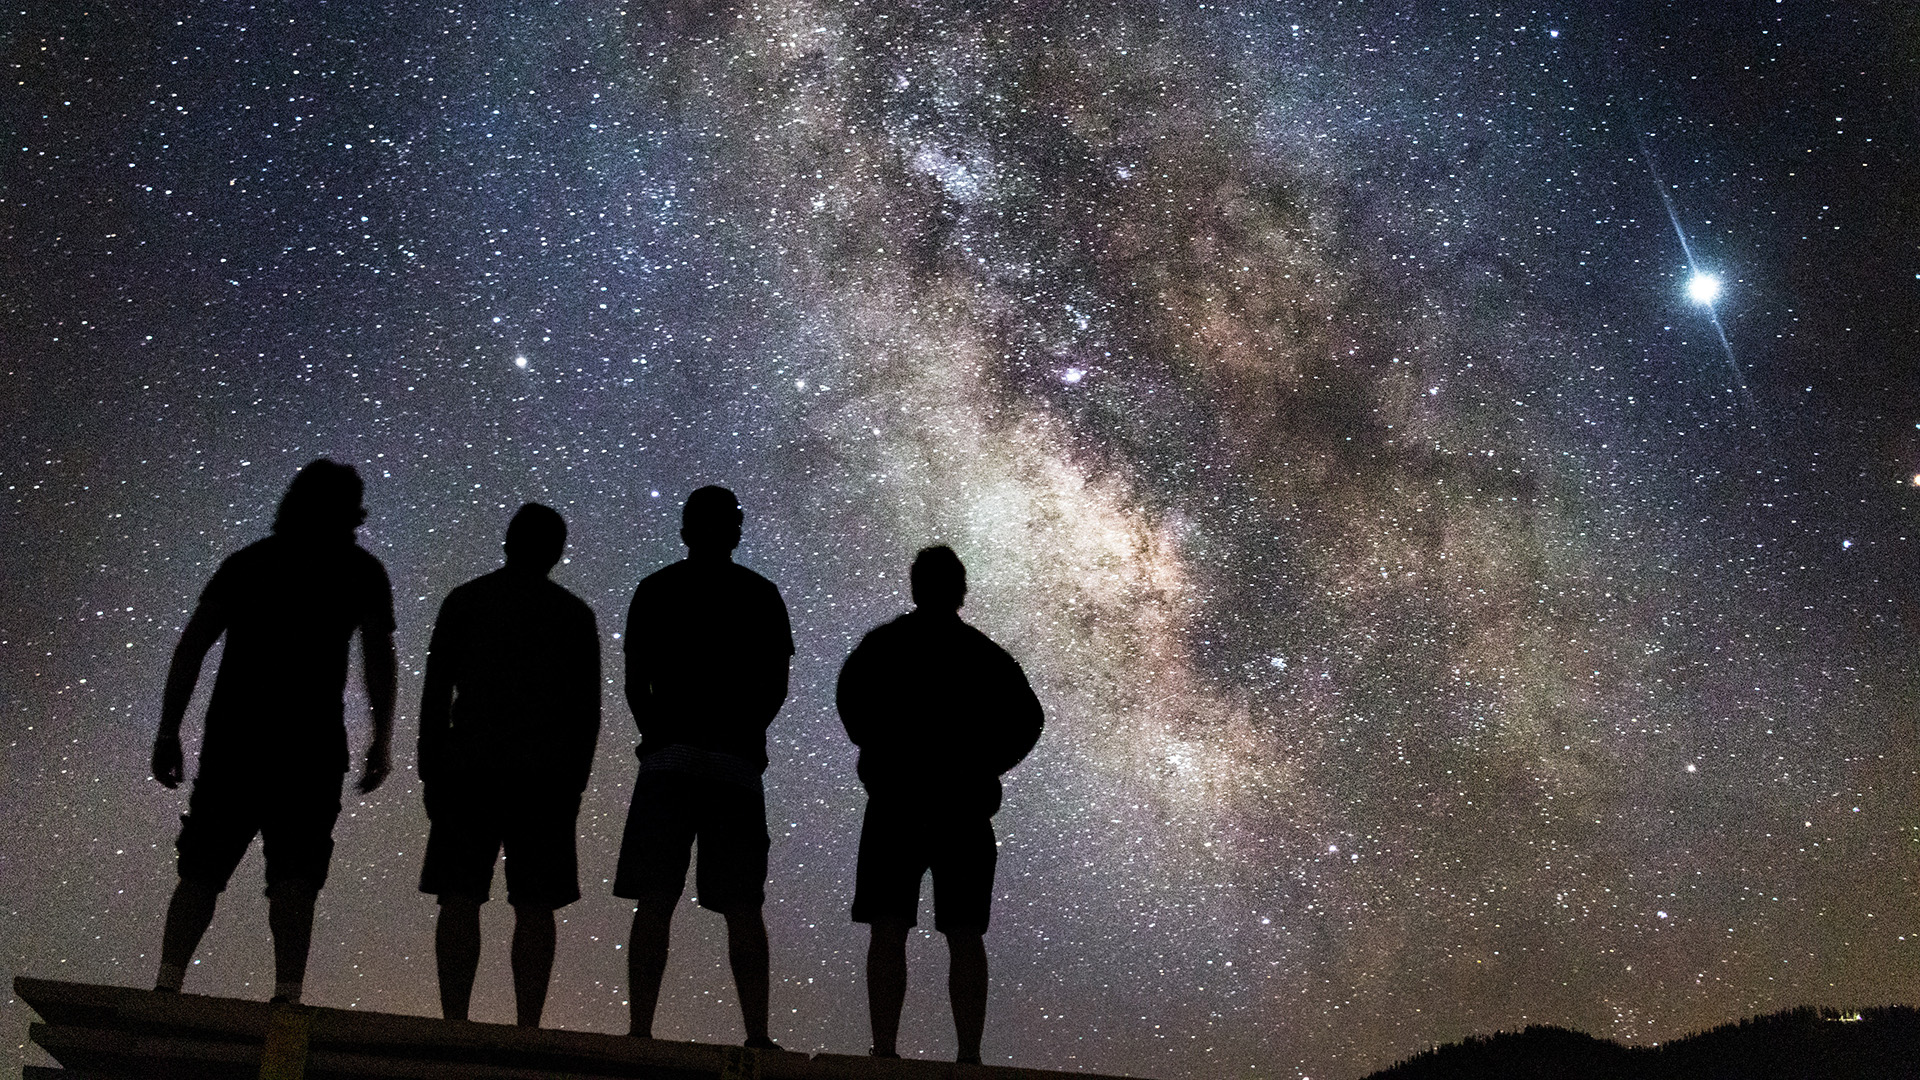 Men silhouetted in front of the night sky with the band of the Milky Way stretching across the sky.